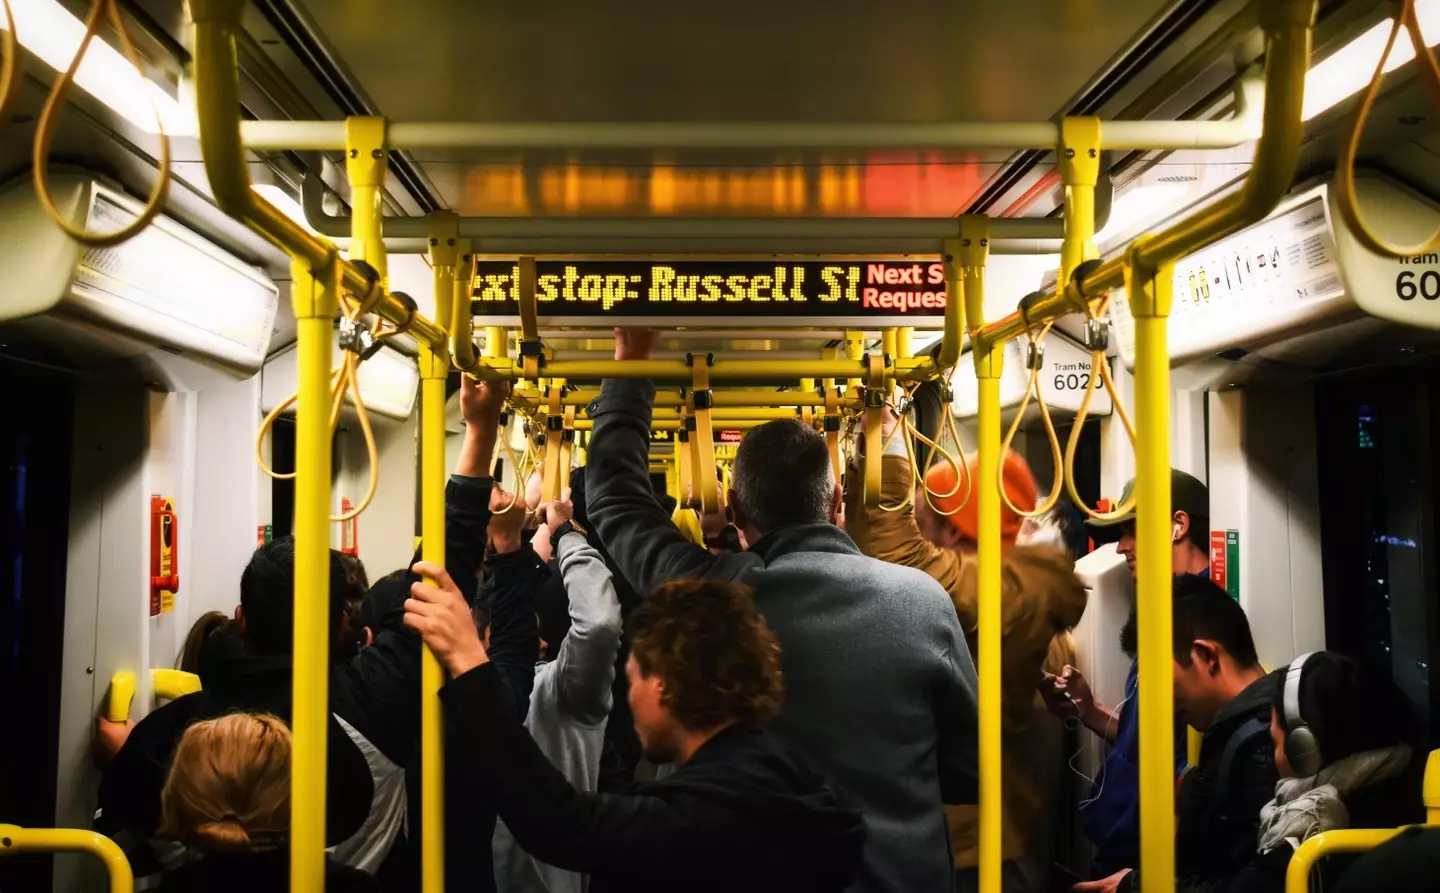 The woman has reopened the heated debate surrounding public transport etiquette.